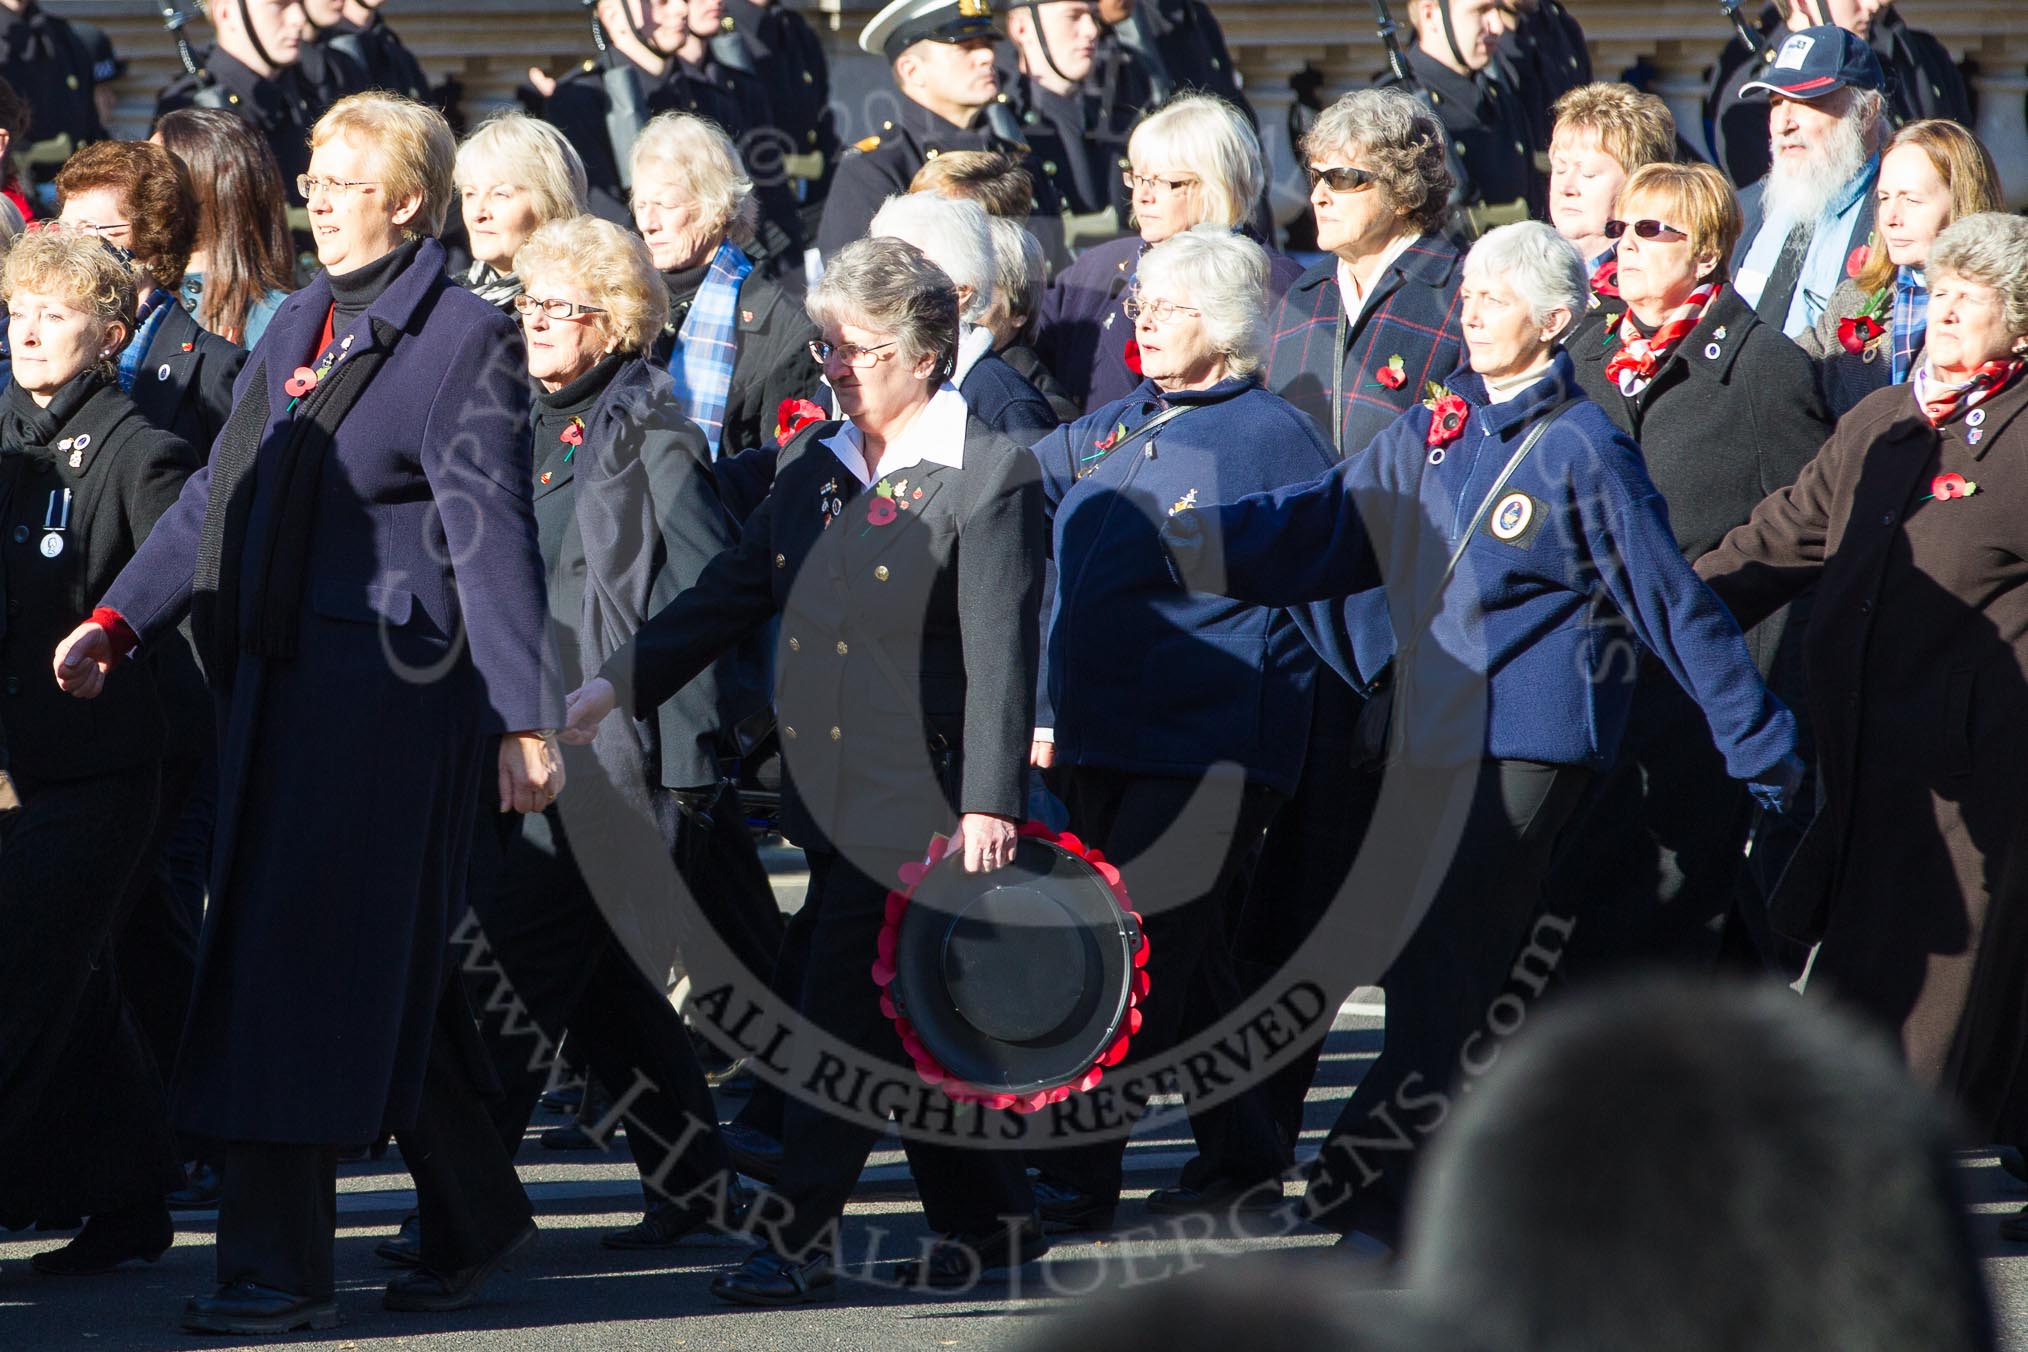 Remembrance Sunday 2012 Cenotaph March Past: Group E29 - Association of WRENS..
Whitehall, Cenotaph,
London SW1,

United Kingdom,
on 11 November 2012 at 11:41, image #213